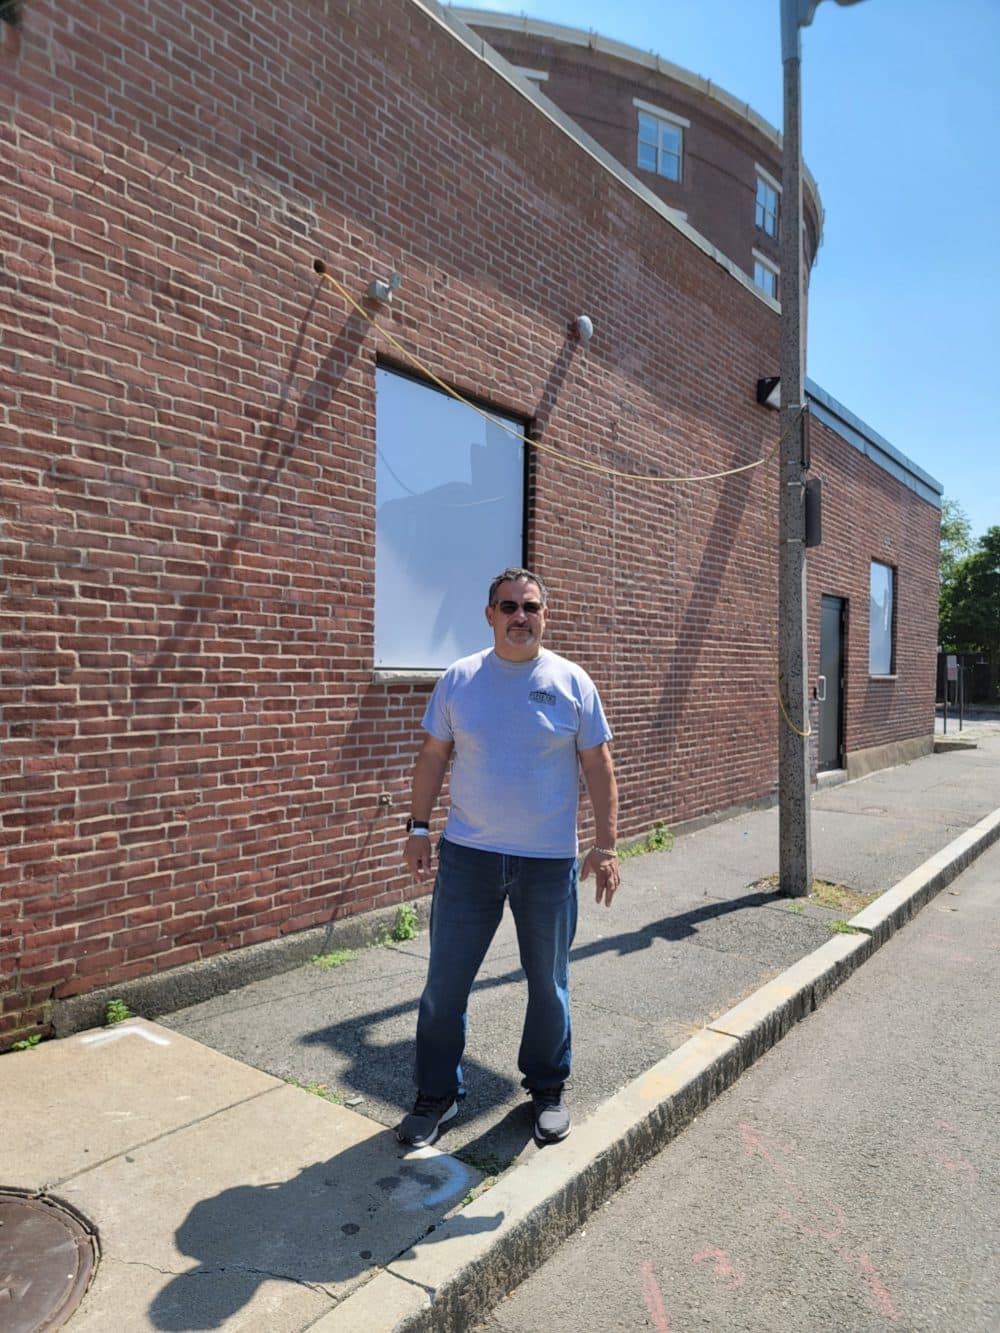 Gerry DiPierro in front of his company, DiPierro Construction. He covered the windows with plexiglass because of problems with theft and vandalism. (Deb Becker/WBUR)